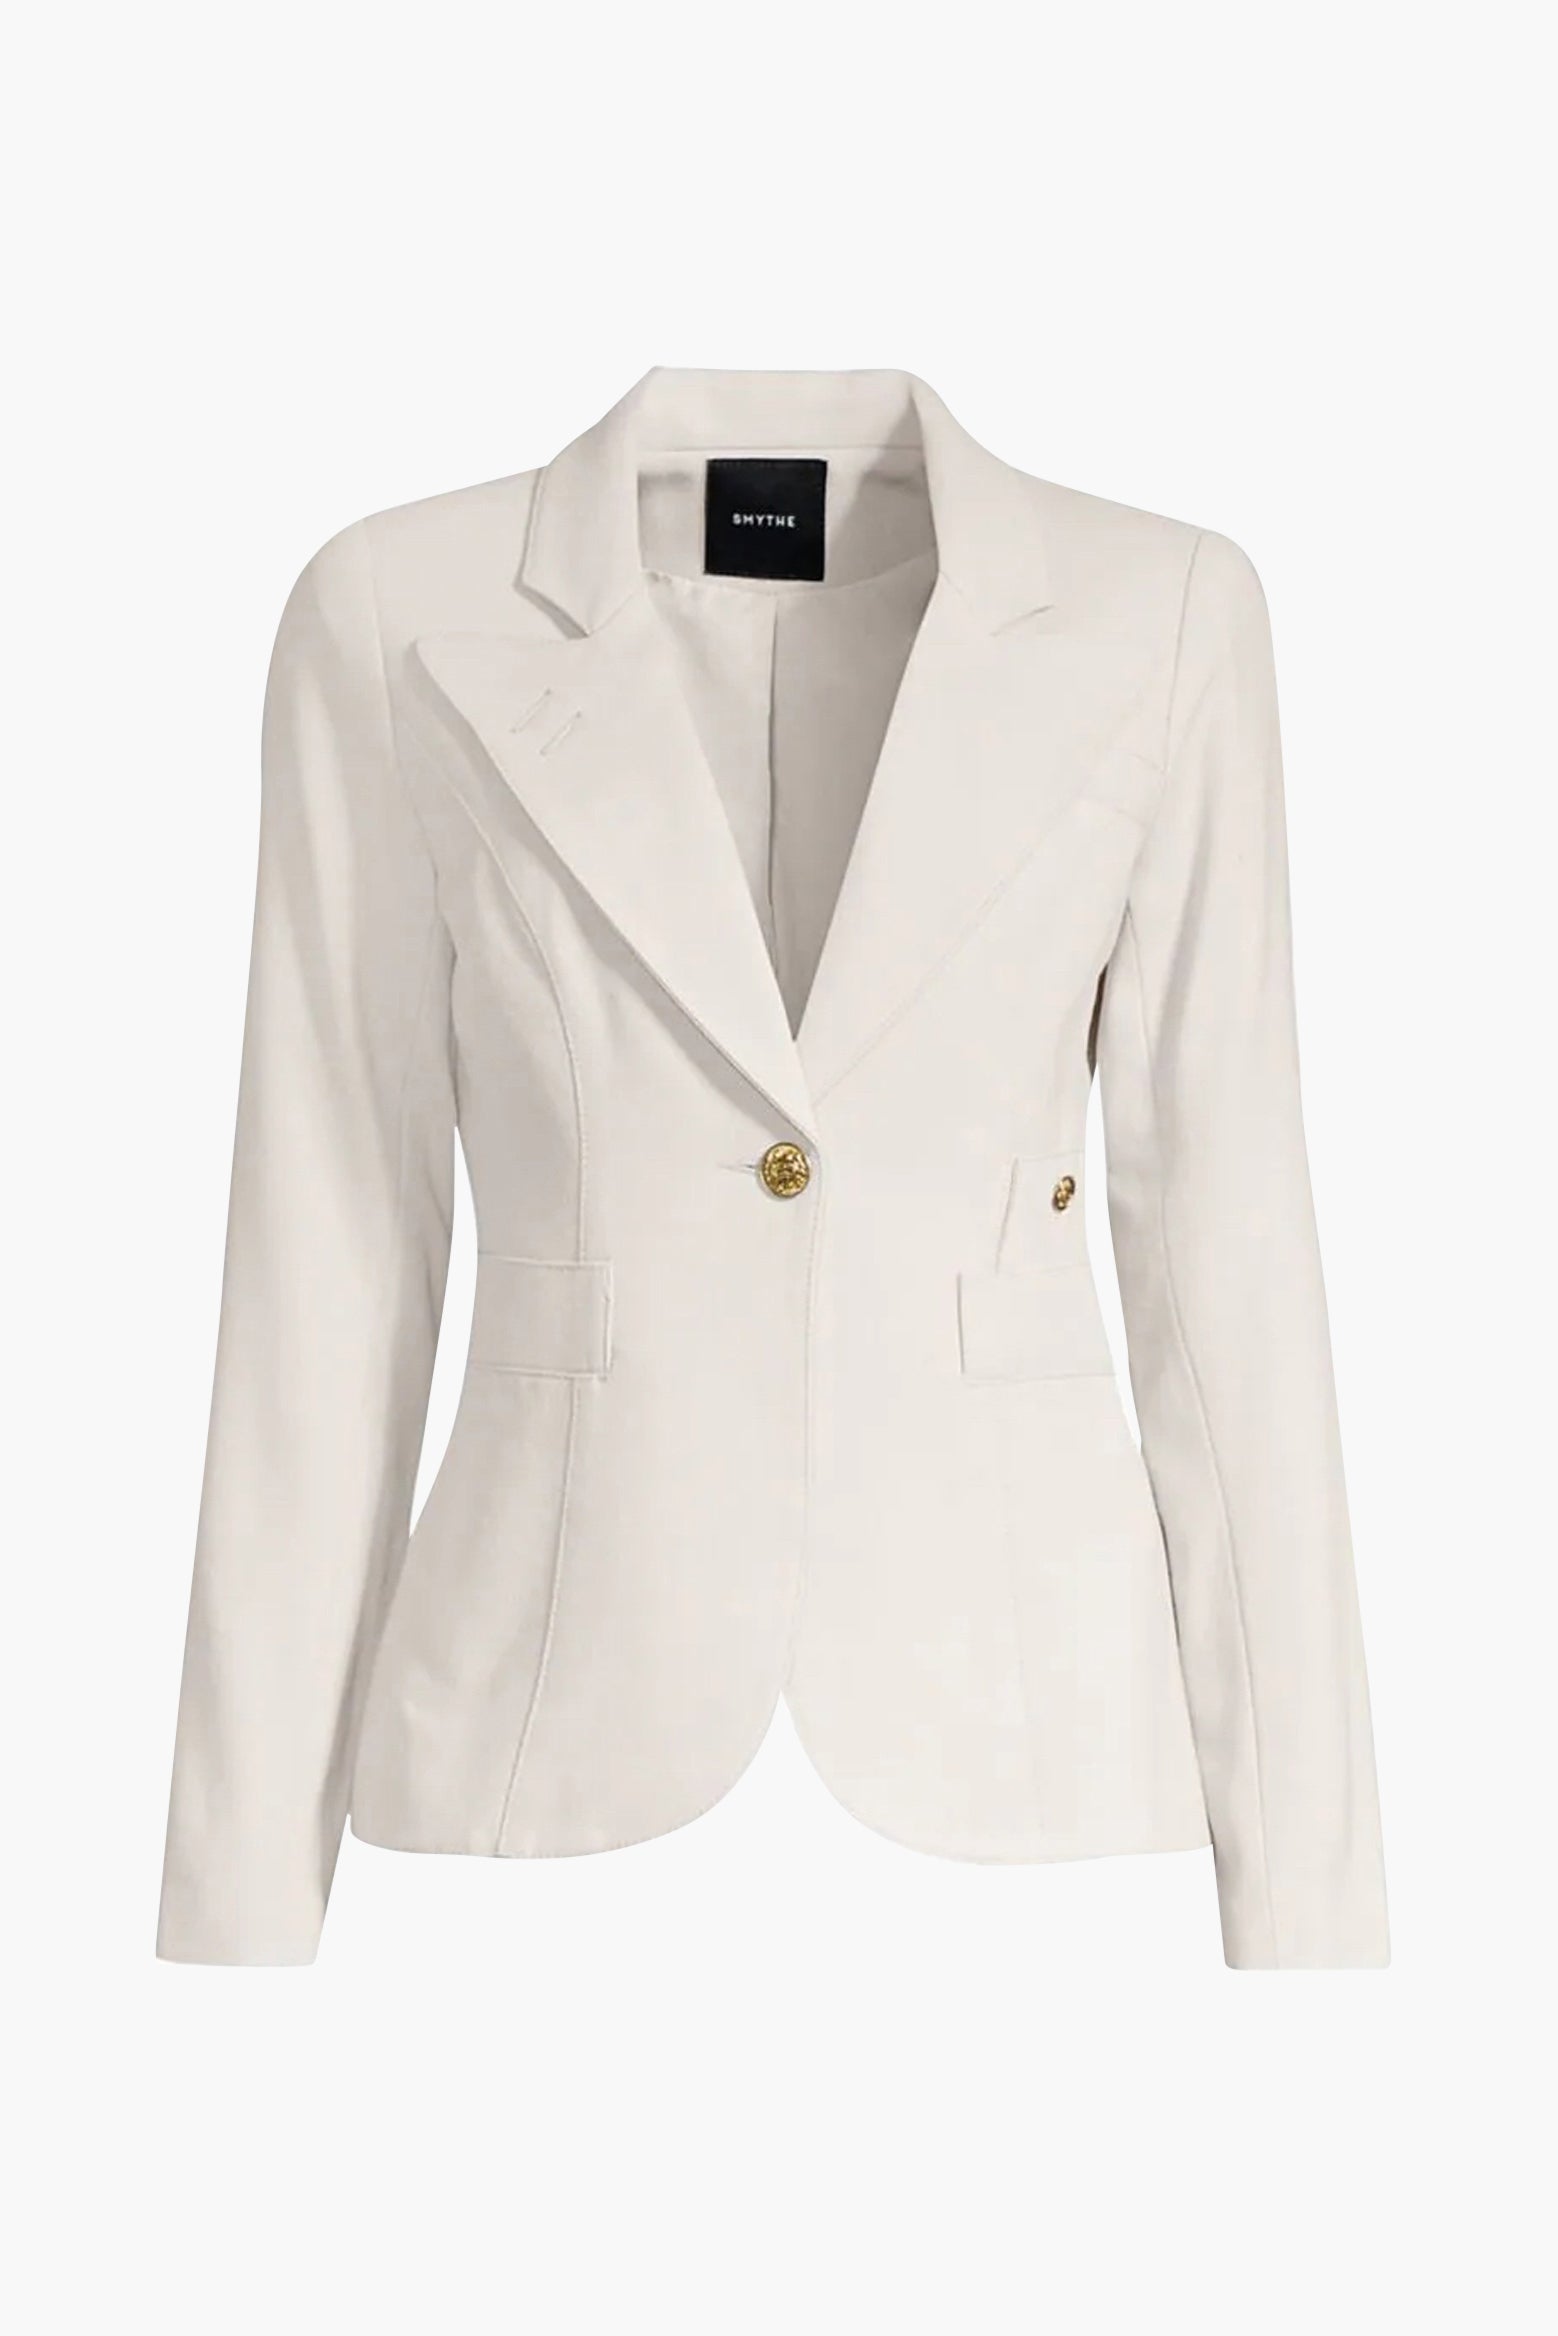 Smythe Duchess Blazer in Ivory available at TNT The New Trend Australia.